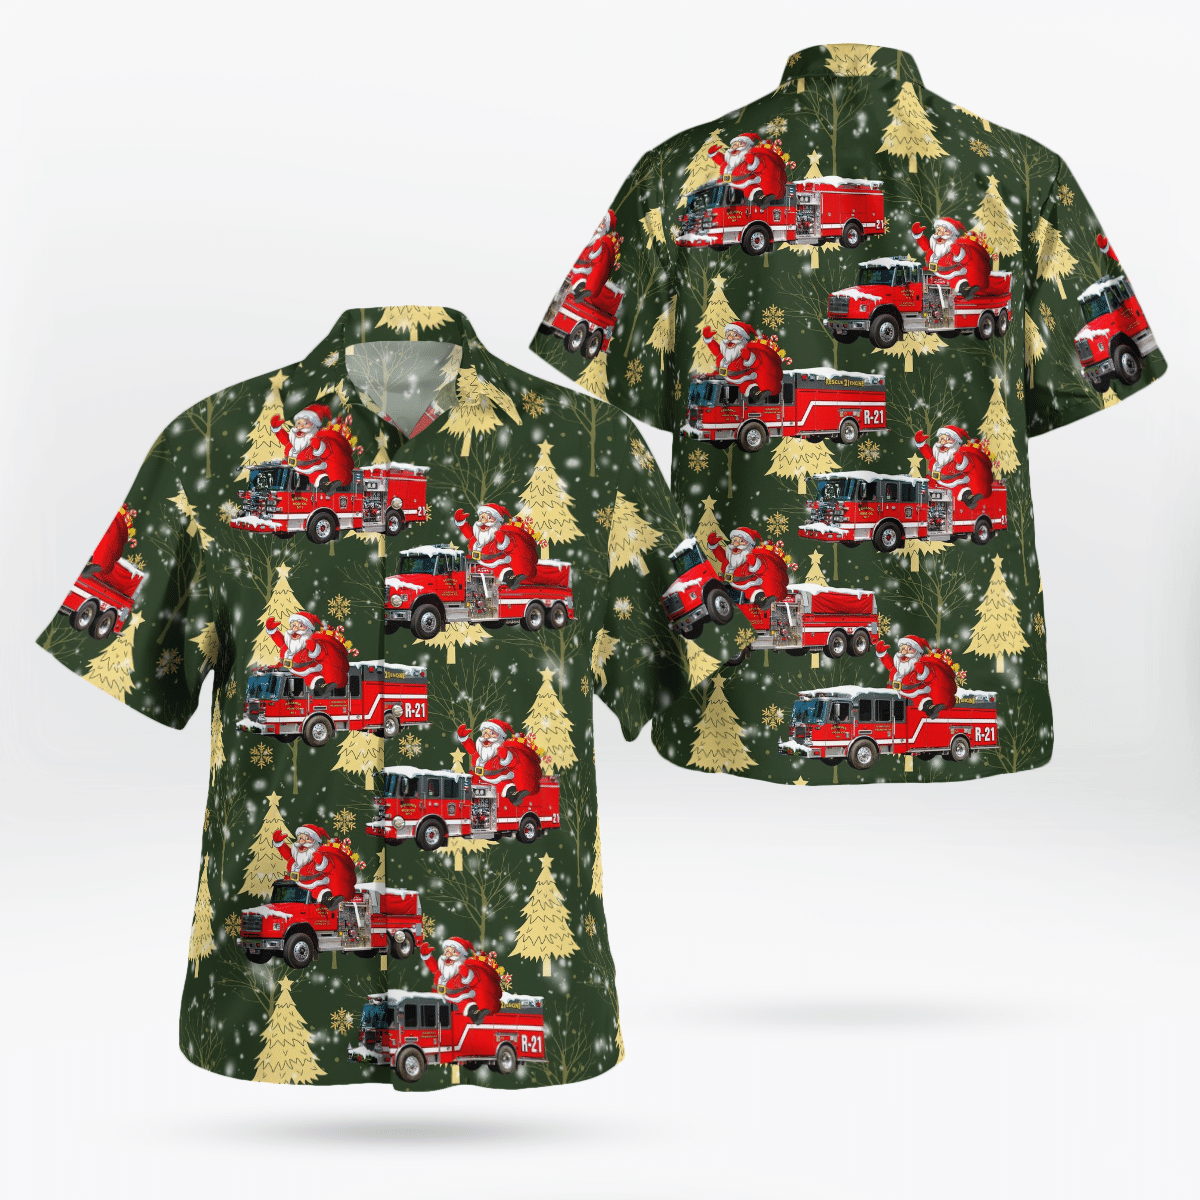 The Best Place To Find An Affordable Hawaiian Shirt Is Our Store Word3